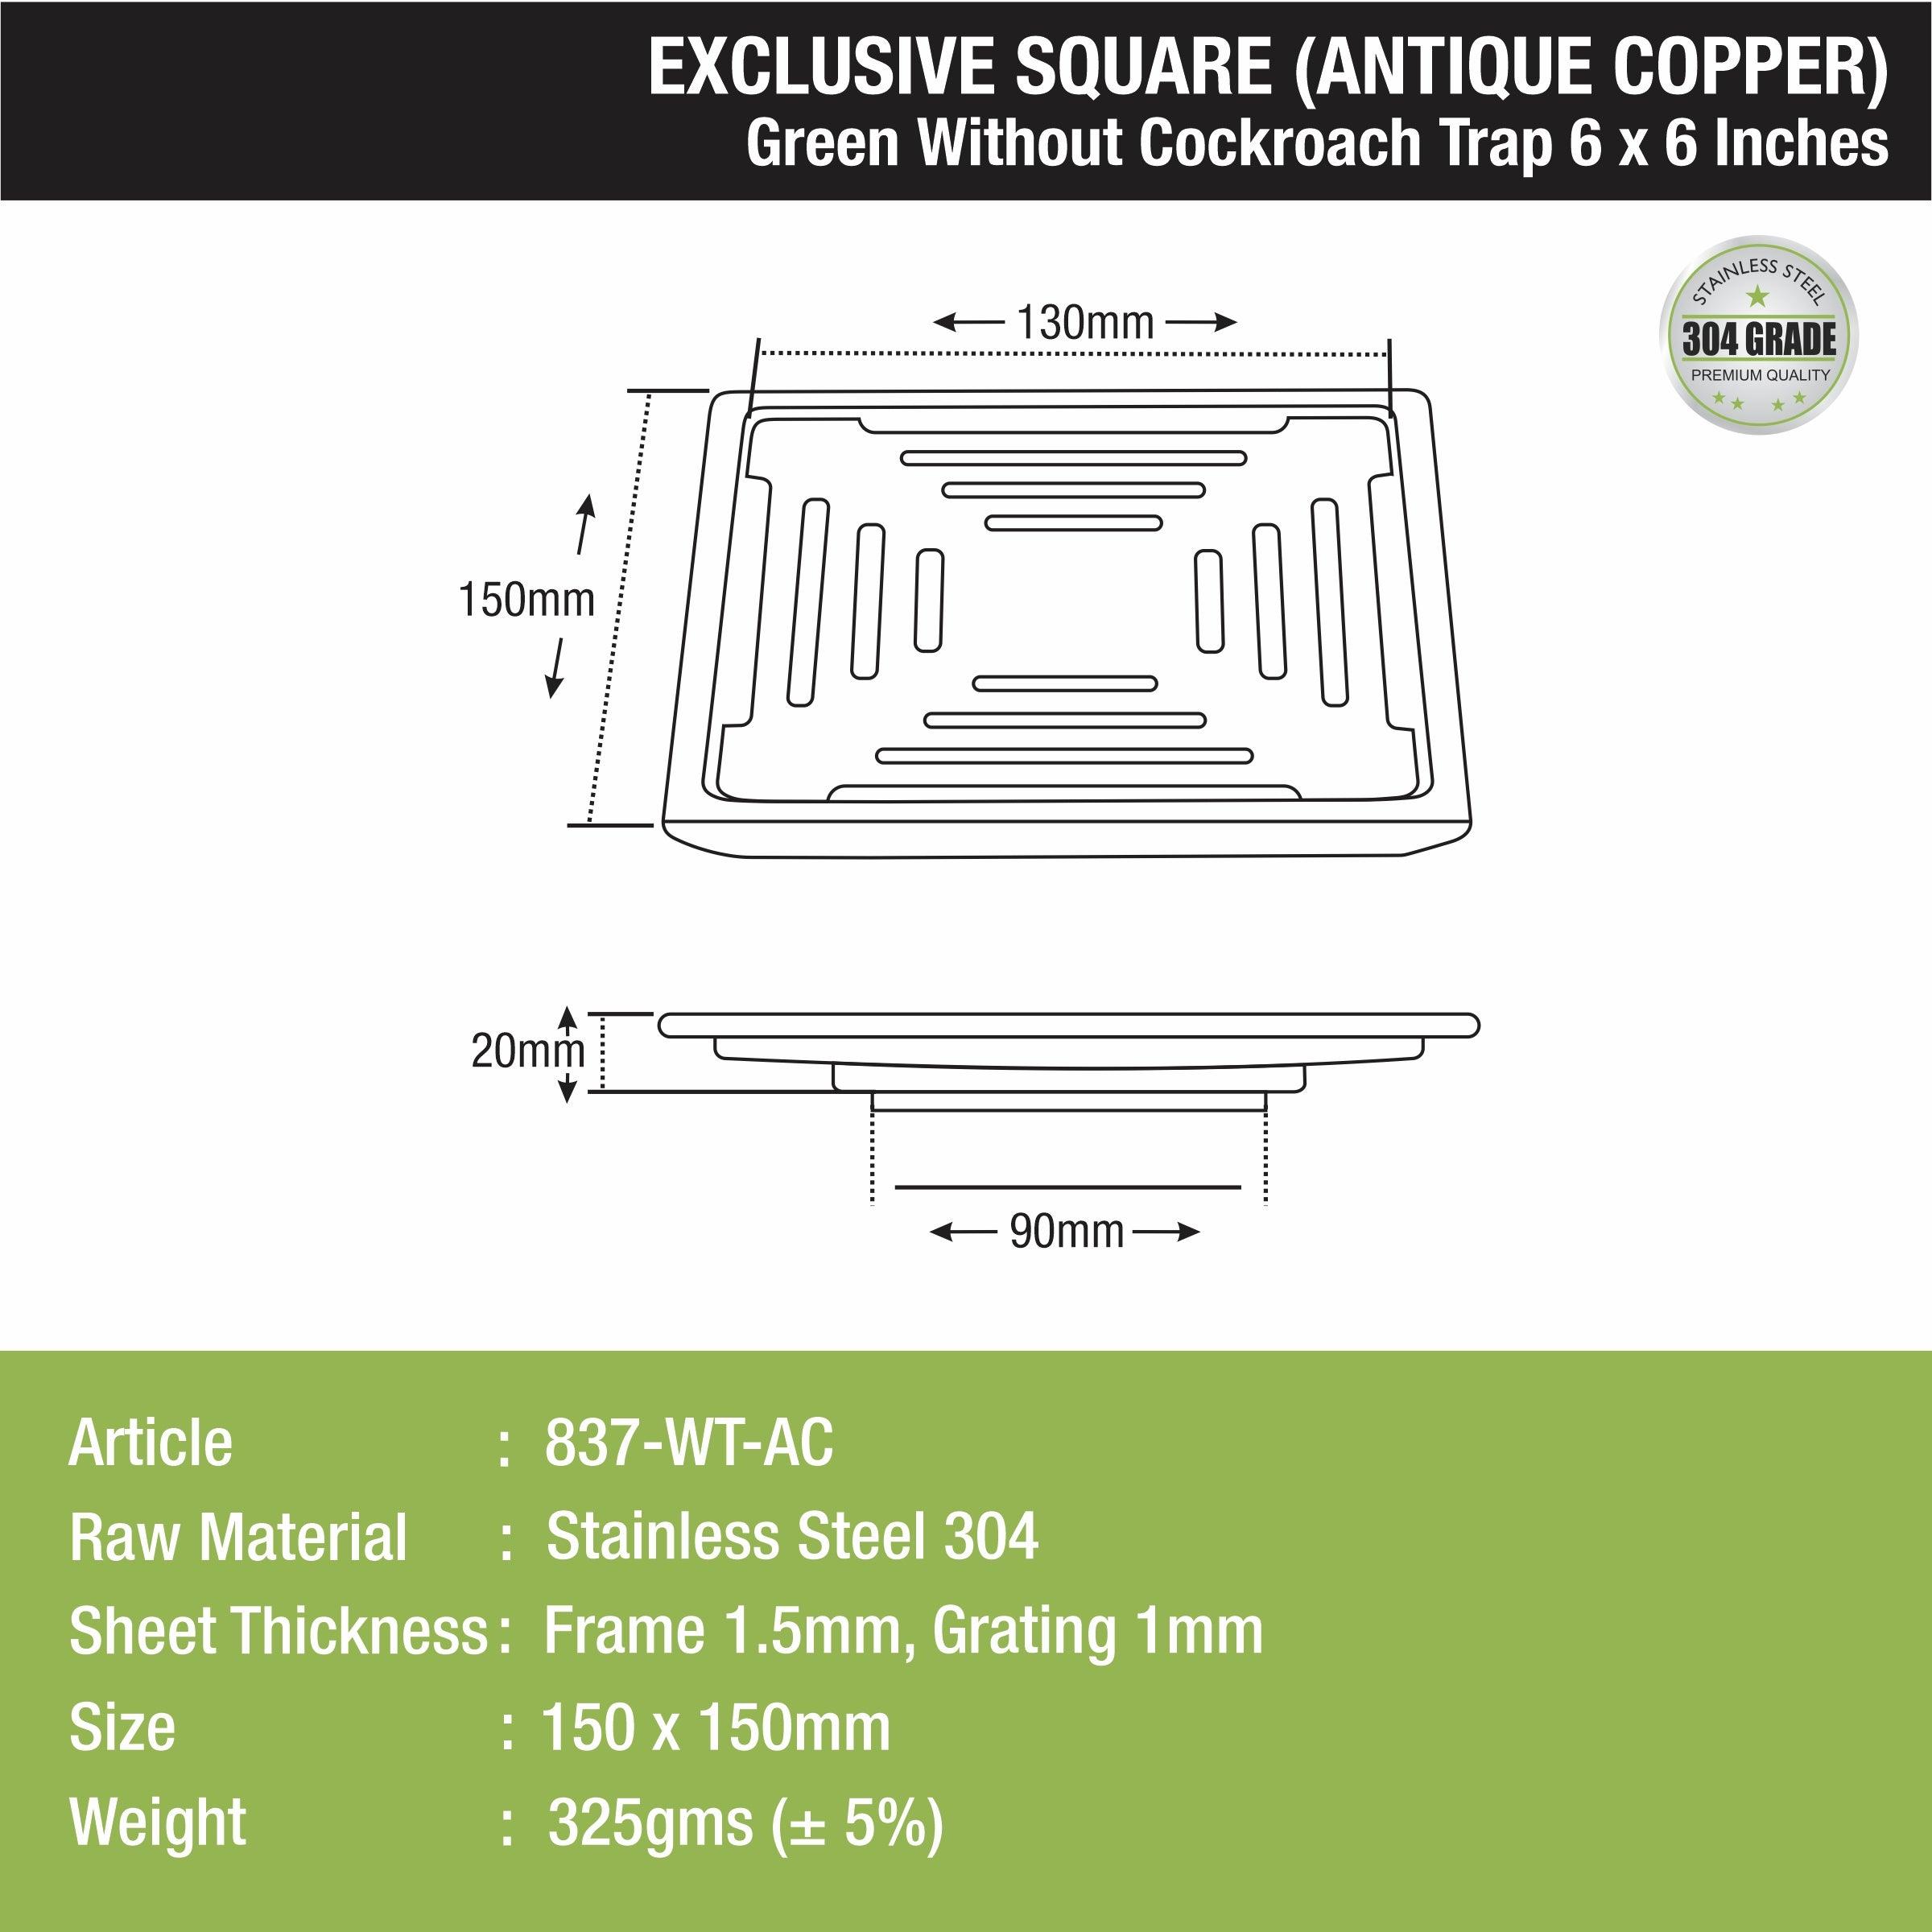 Green Exclusive Square Floor Drain in Antique Copper PVD Coating (6 x 6 Inches) sizes and dimensions